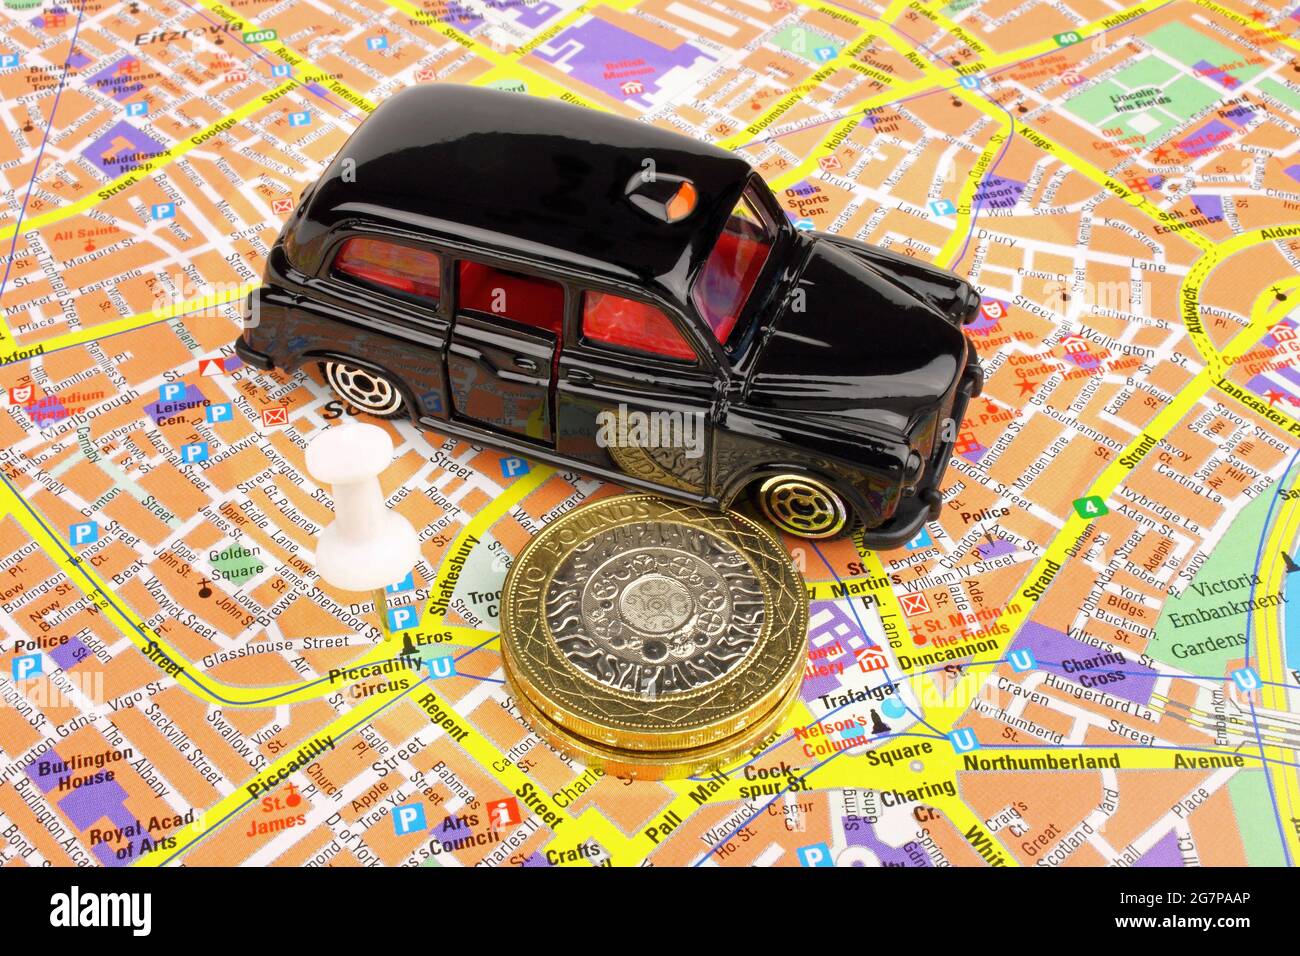 A  black cab taxi, on a map of London city. Stock Photo